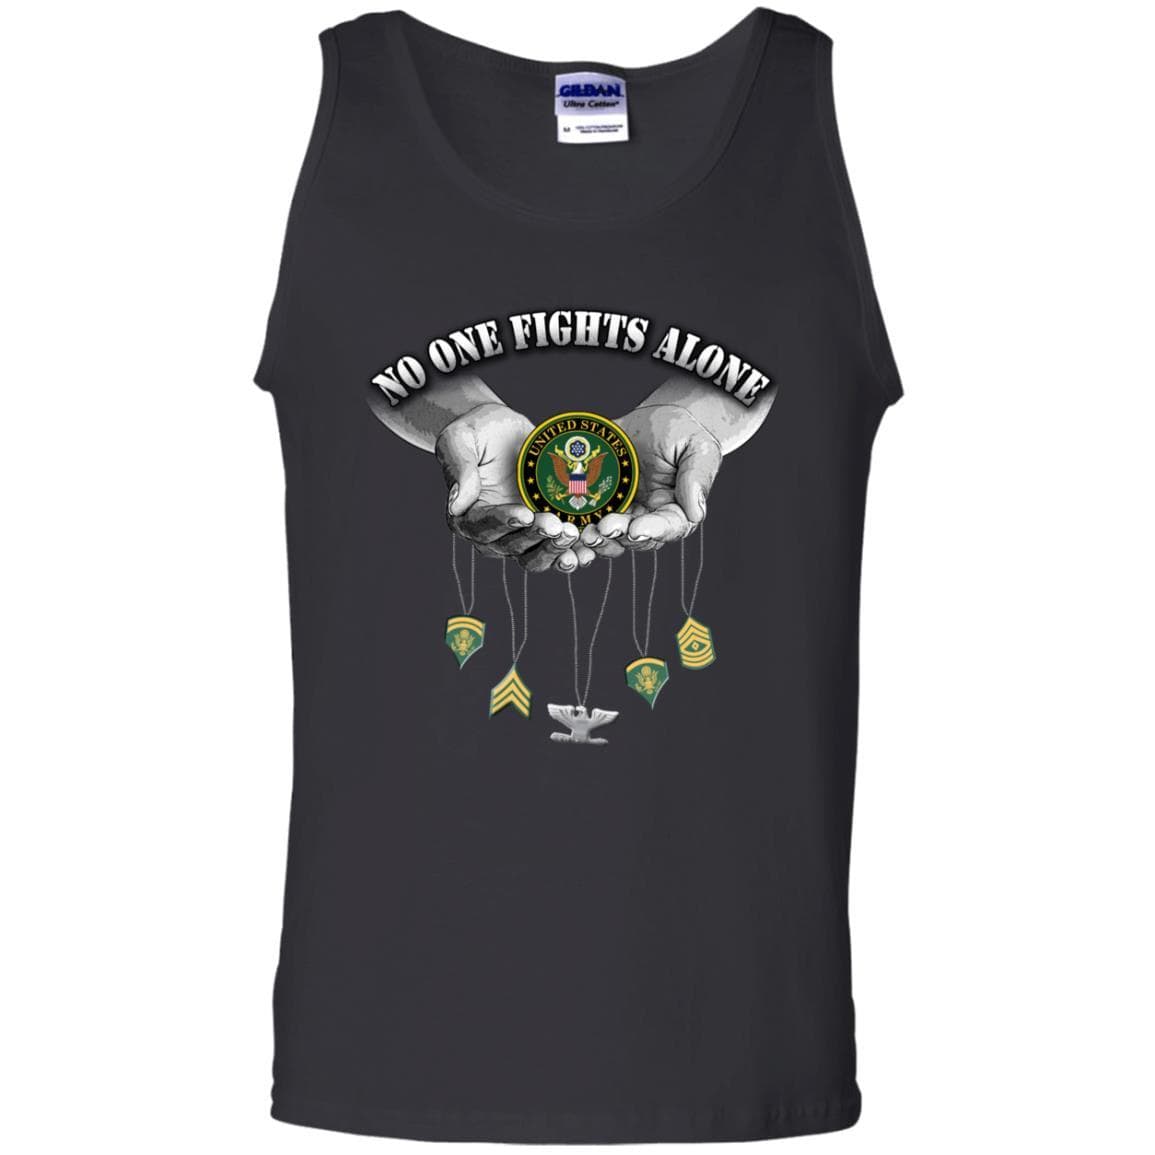 T-Shirt "No One Fights Alone Army Ranks" On Front-TShirt-Army-Veterans Nation